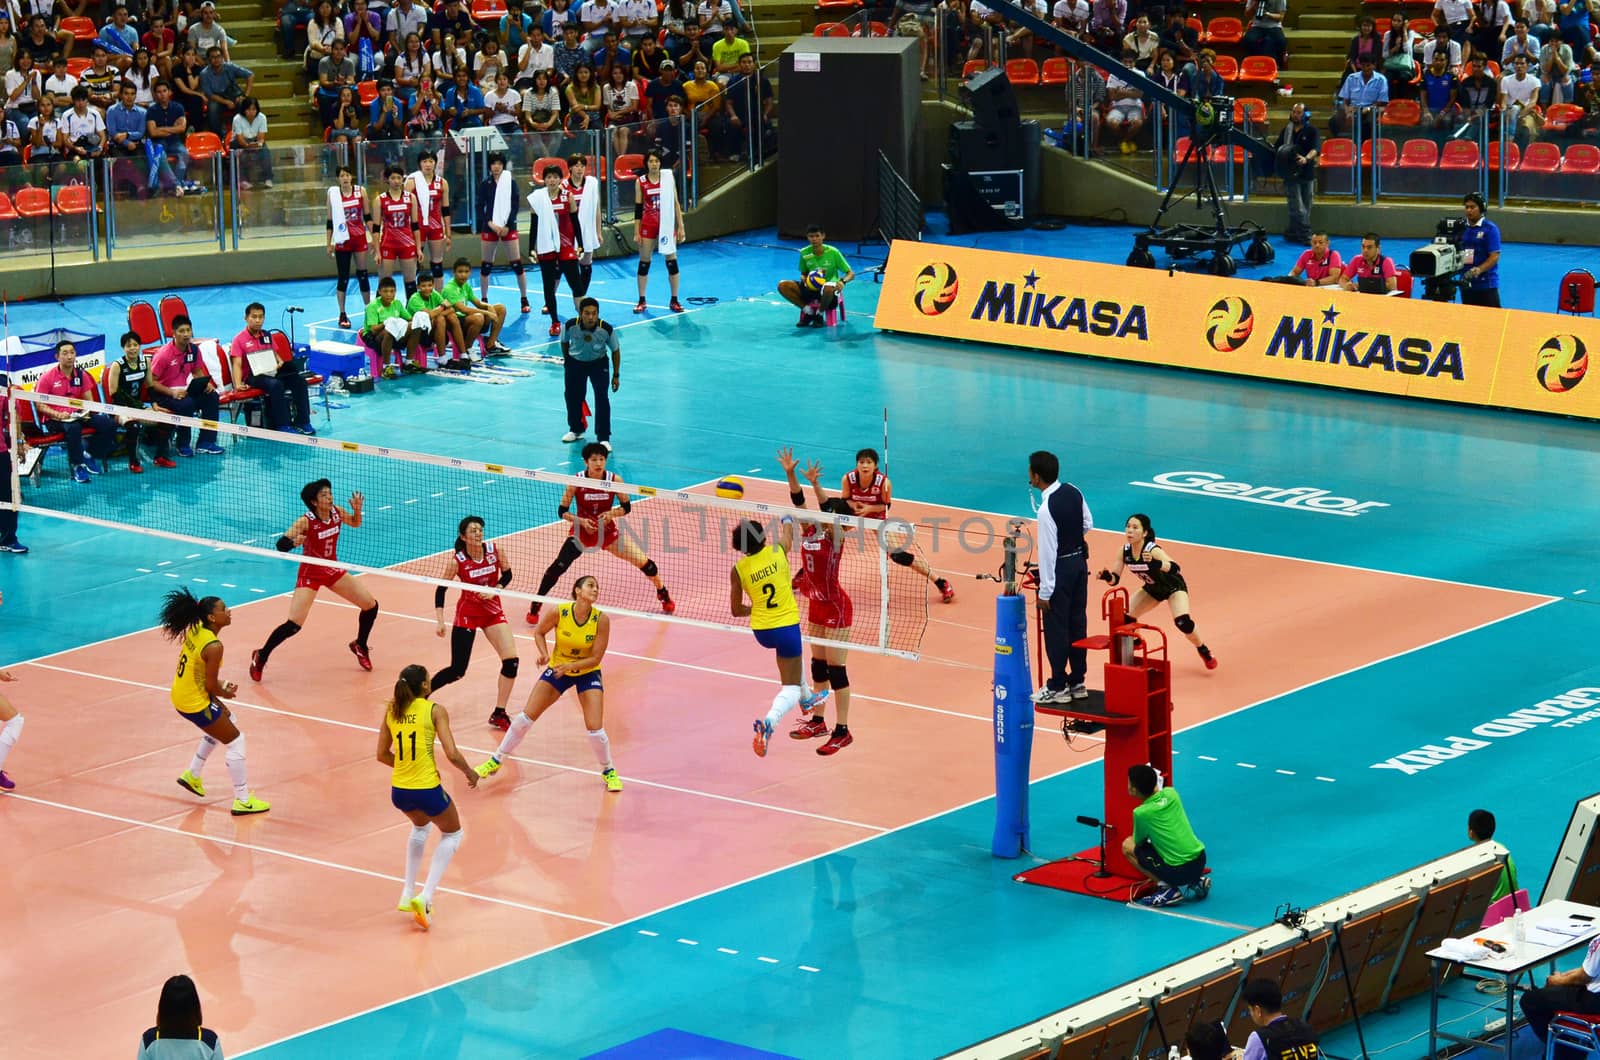 Bangkok, Thailand - July 3, 2015: Juciely #2 of Brazil spikes over Japanese block during the FIVB Volleyball World Grand Prix Brazil and Japan at Indoor Stadium Huamark on July 3, 2015 in Bangkok, Thailand.